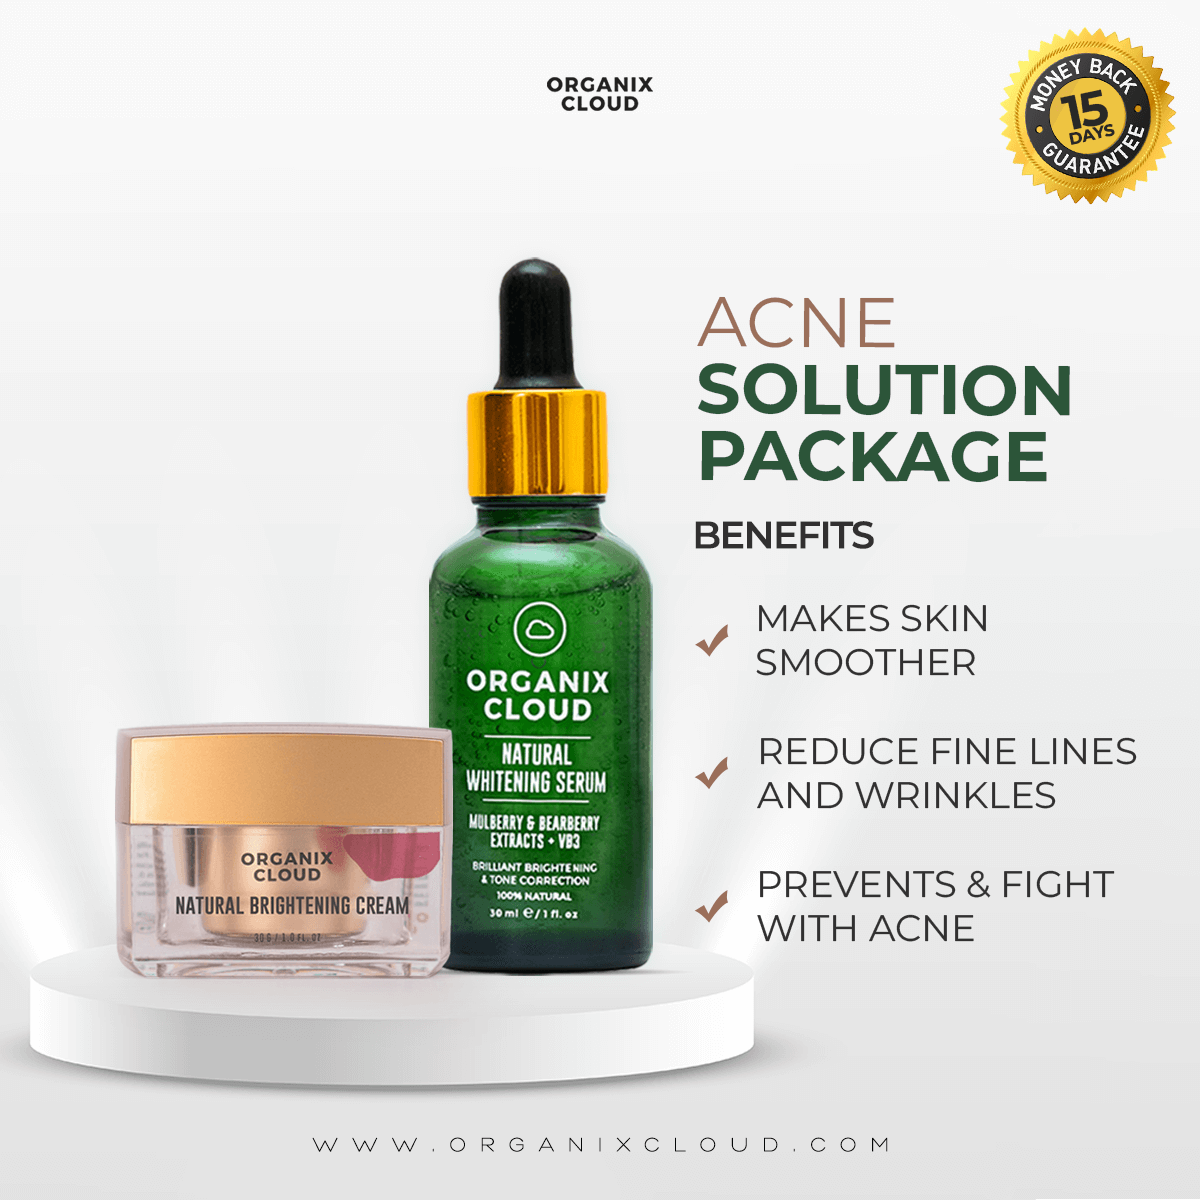 Acne Solution Package